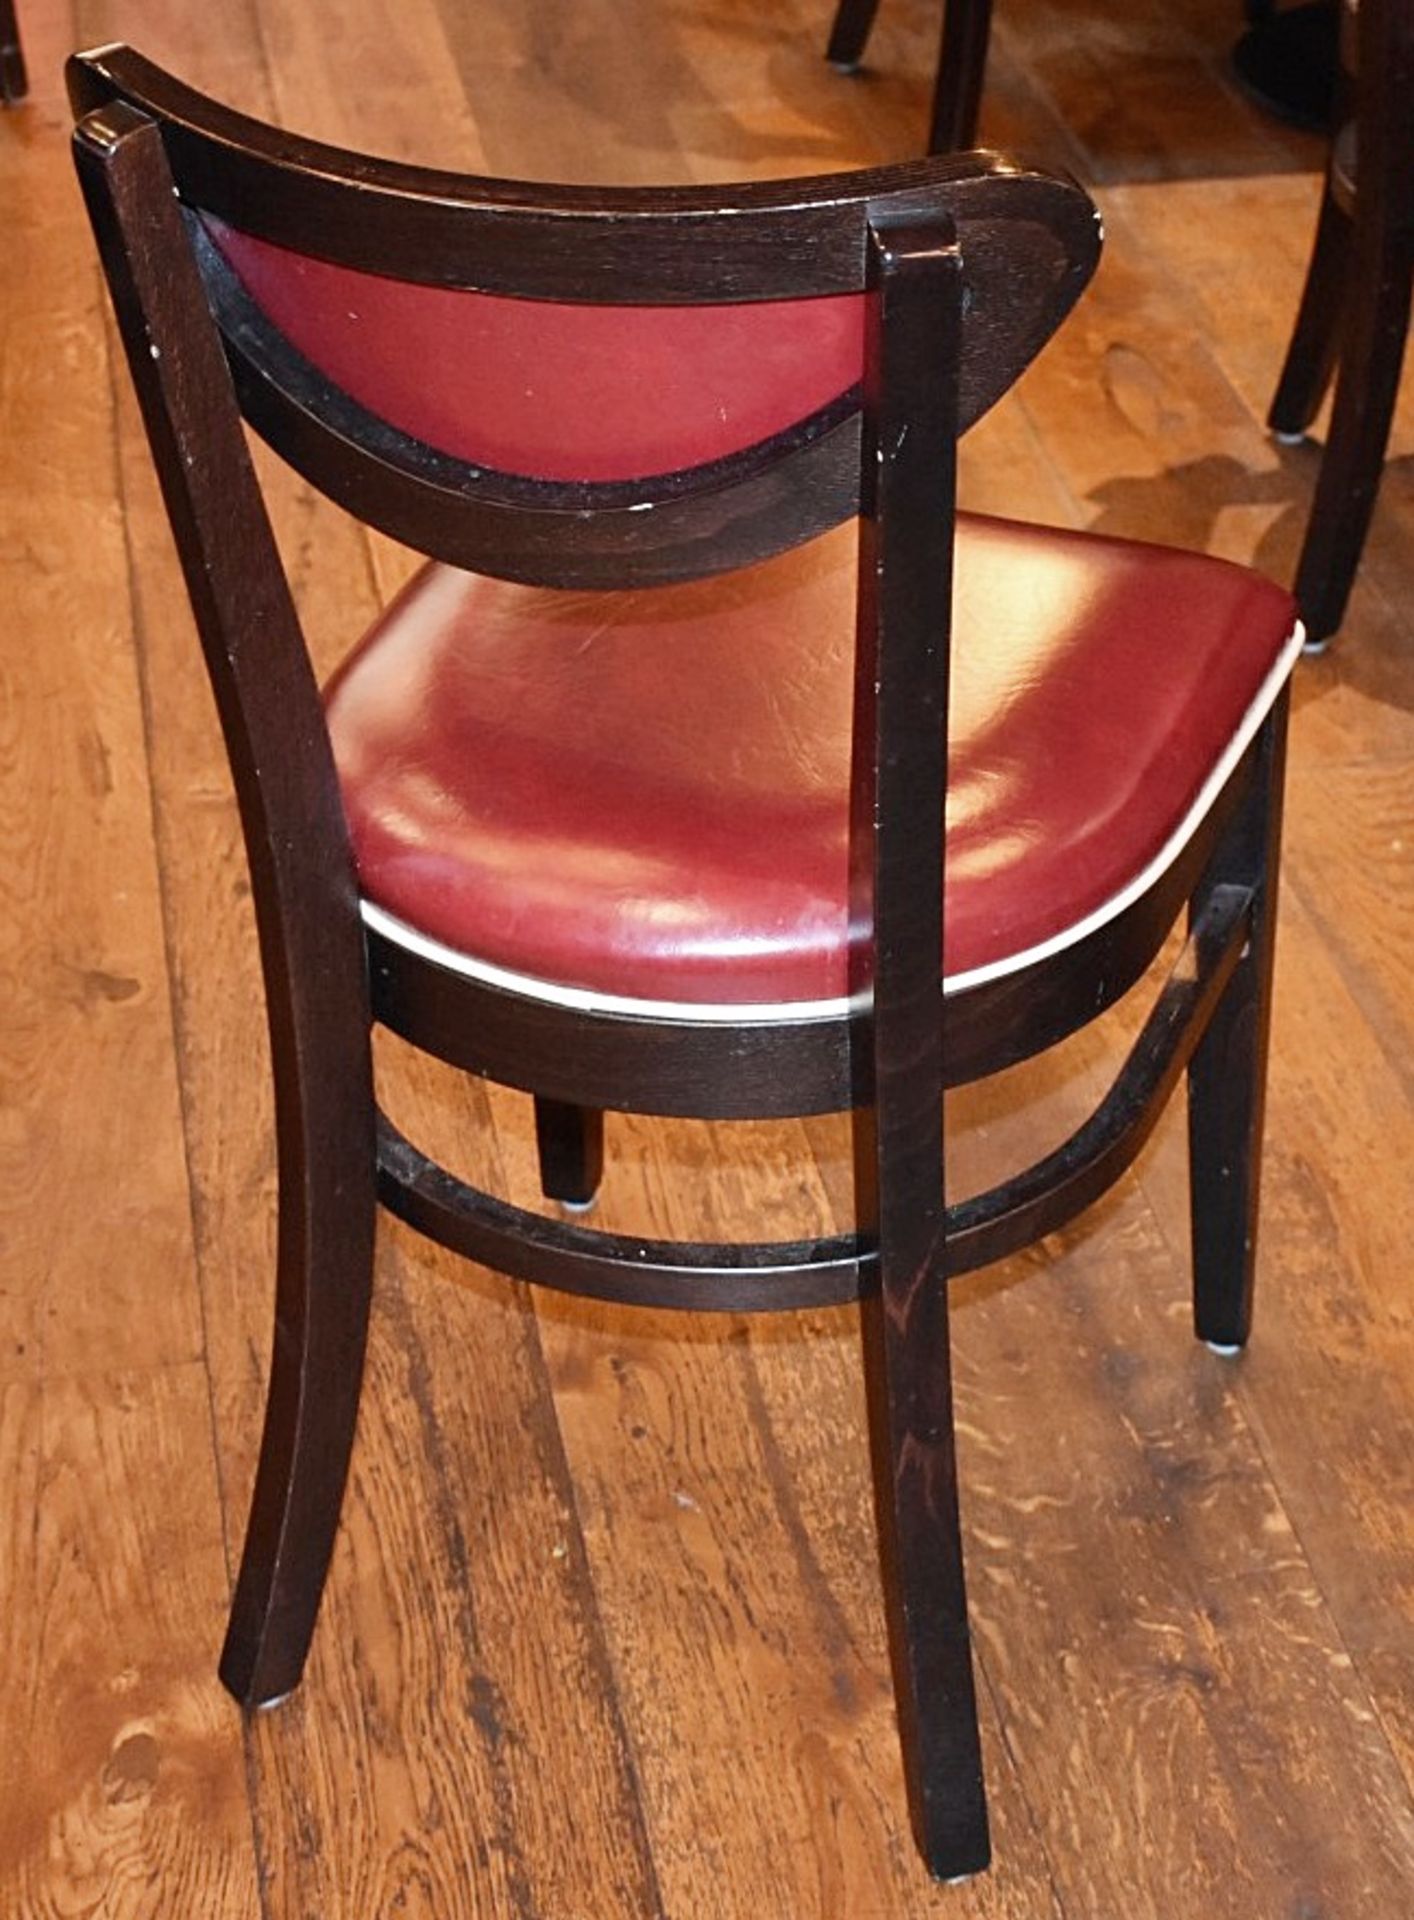 4 x Wine Red Faux Leather Dining Chairs From Italian American Restaurant - Retro Design With Dark - Image 2 of 4